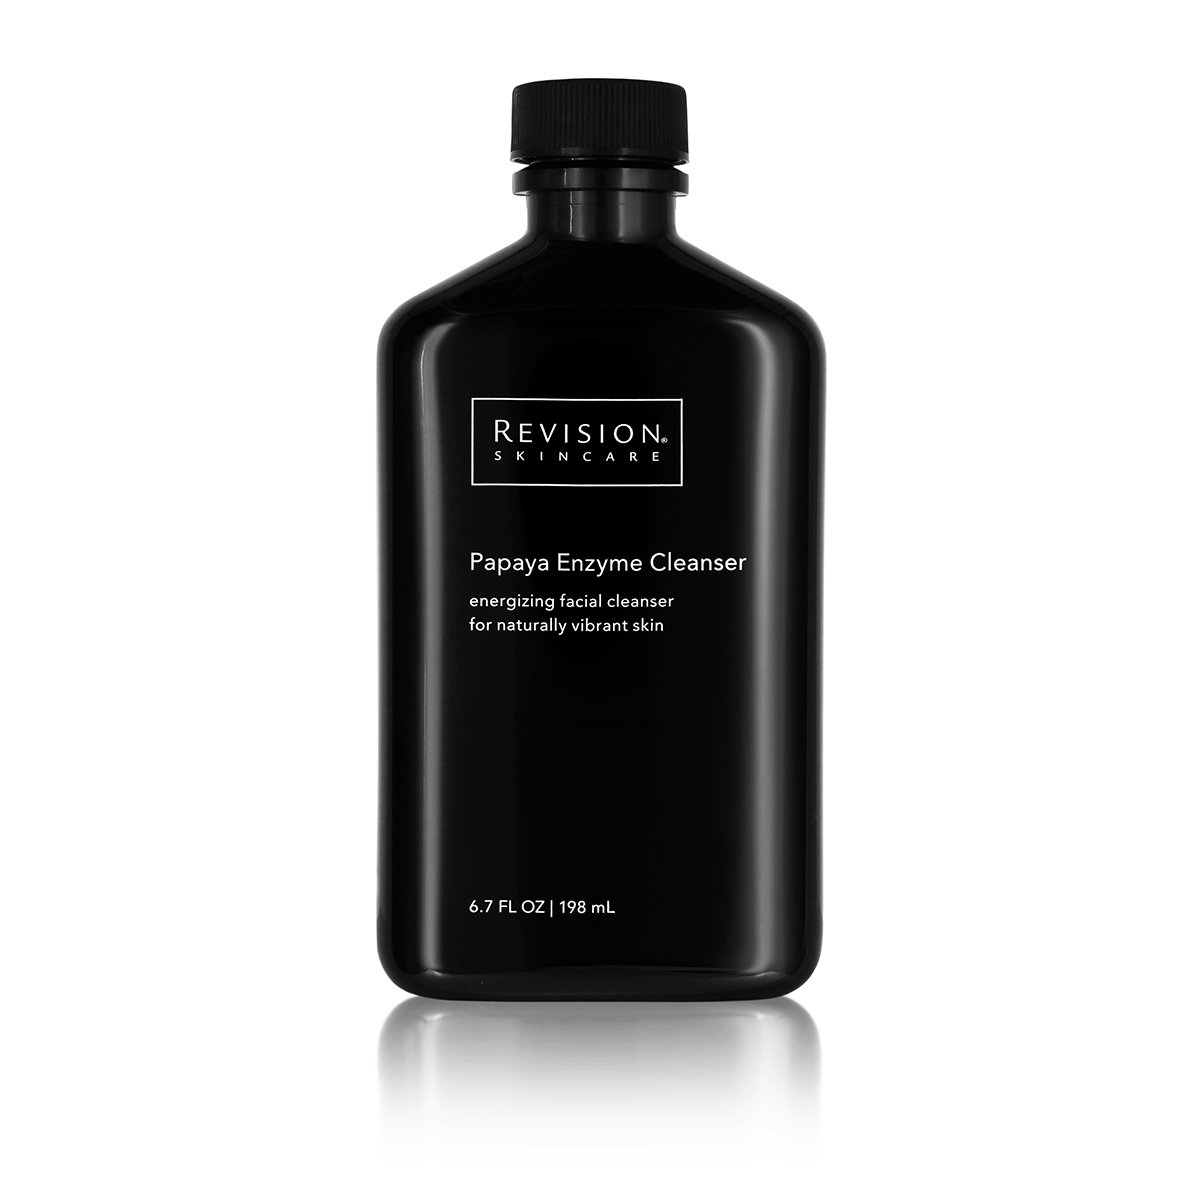 Revision Papaya Enzyme Cleanser 198mL